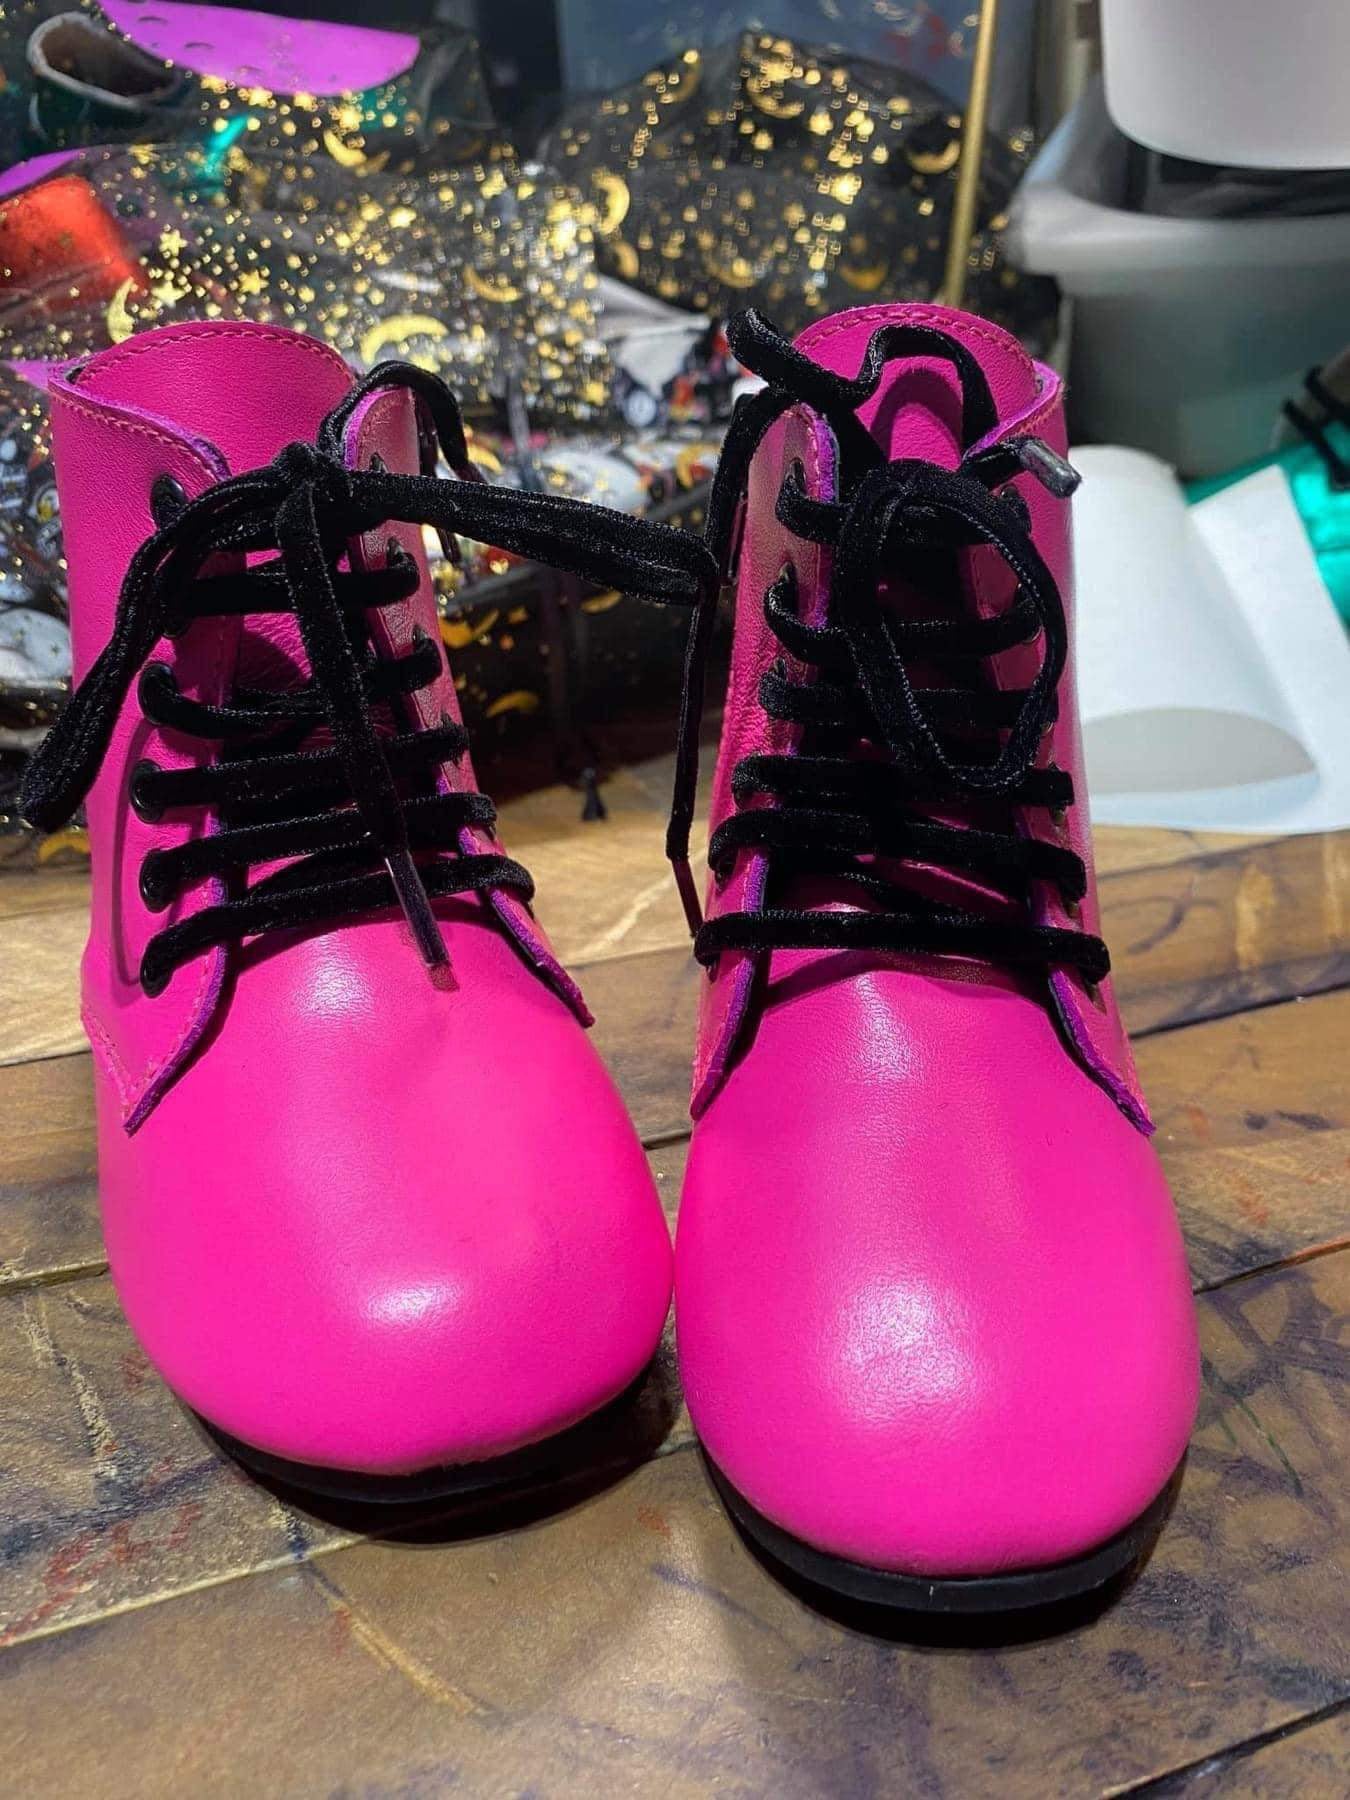 Valentines Special! THREE Pairs of Mix + Match Nyx Booties! Pink + Candy Hearts + Matte Black